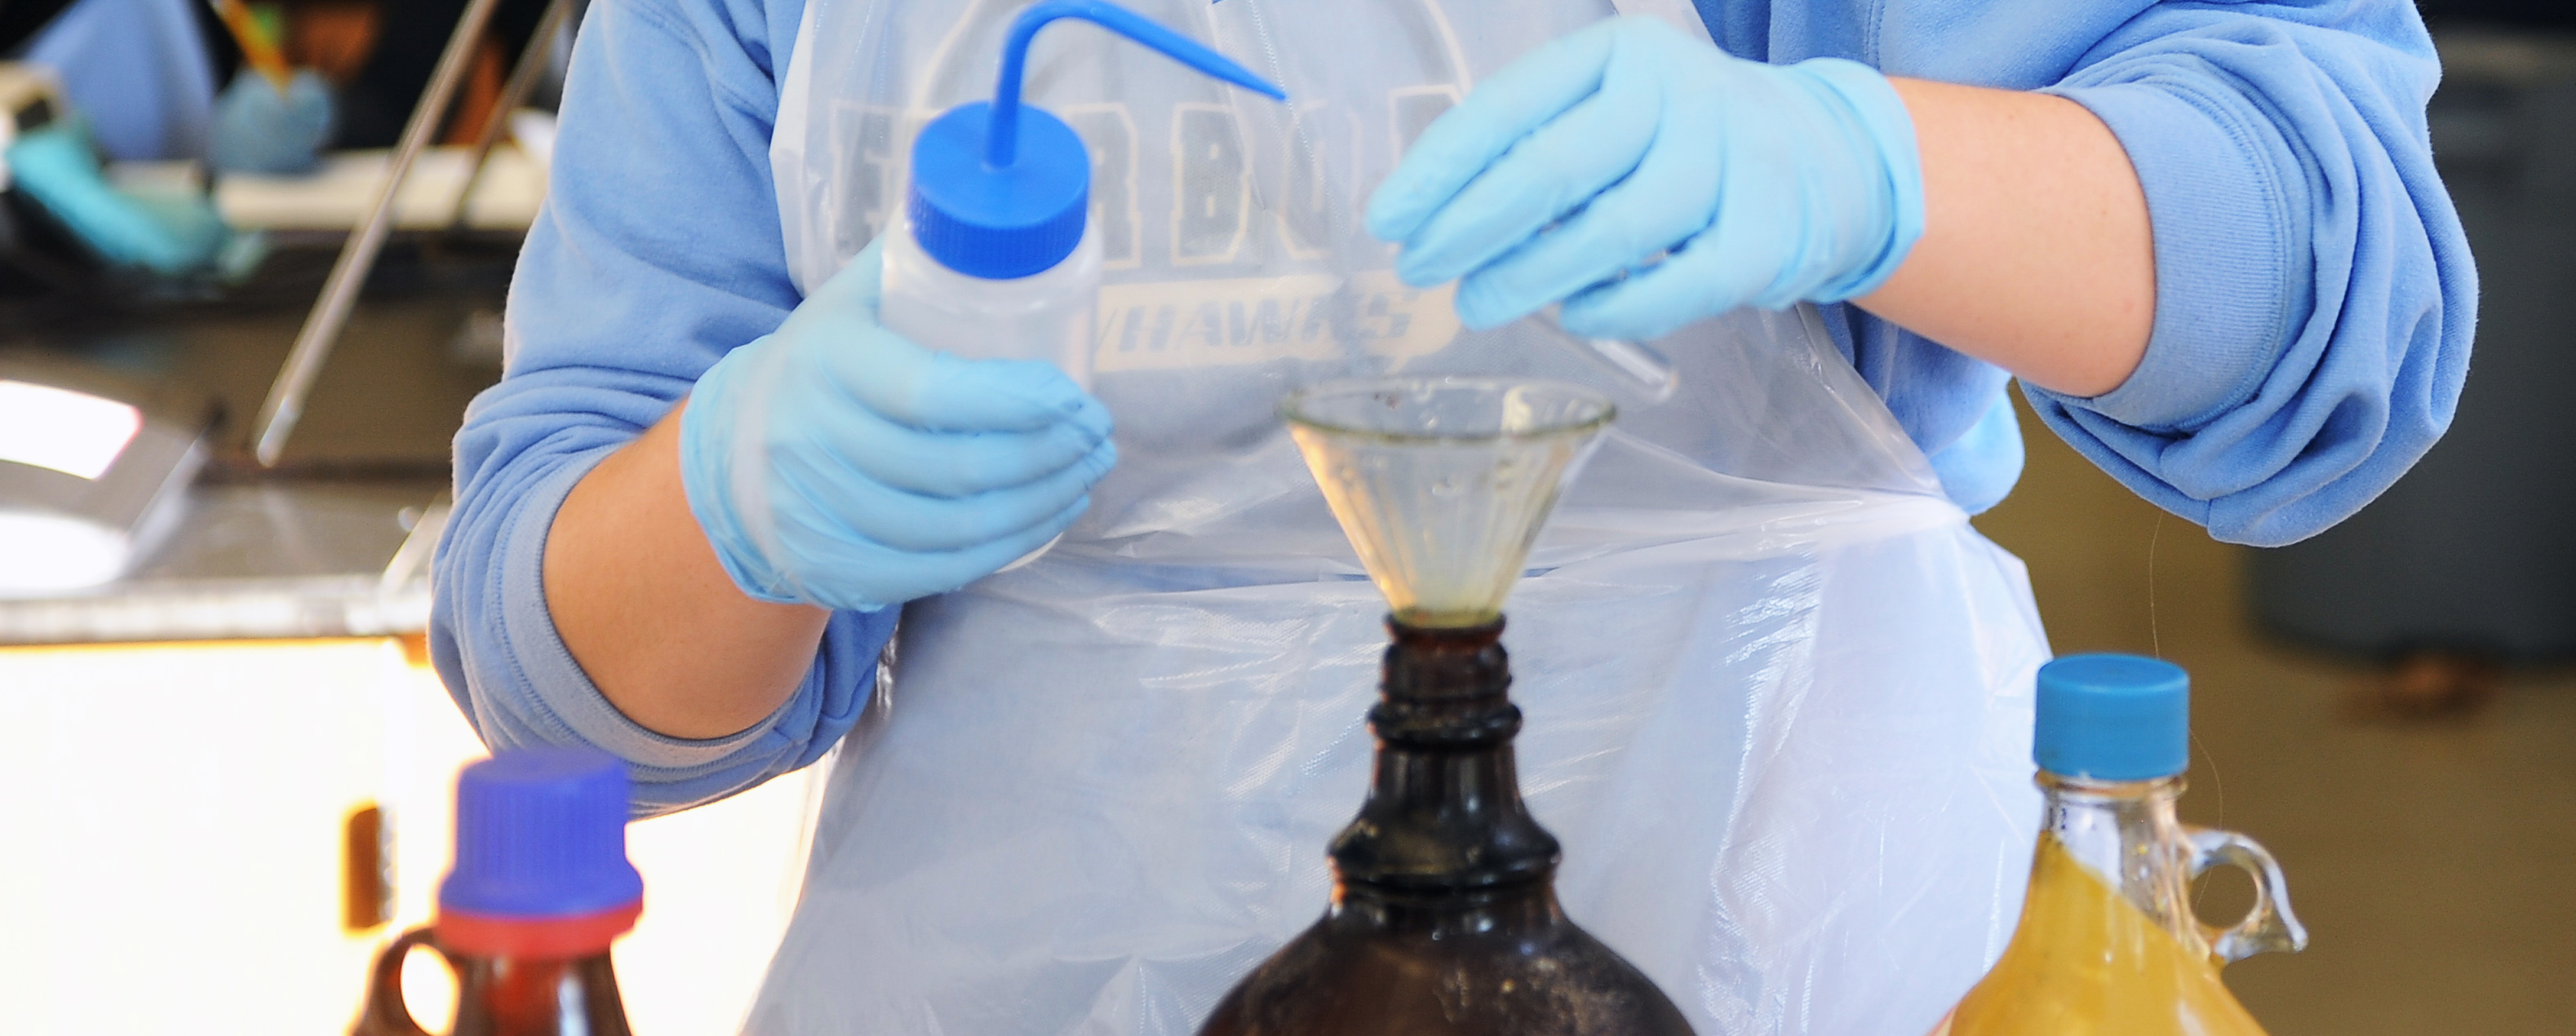 Close up of hands wearing blue rubber gloves handling test tubes and bottles in a science lab